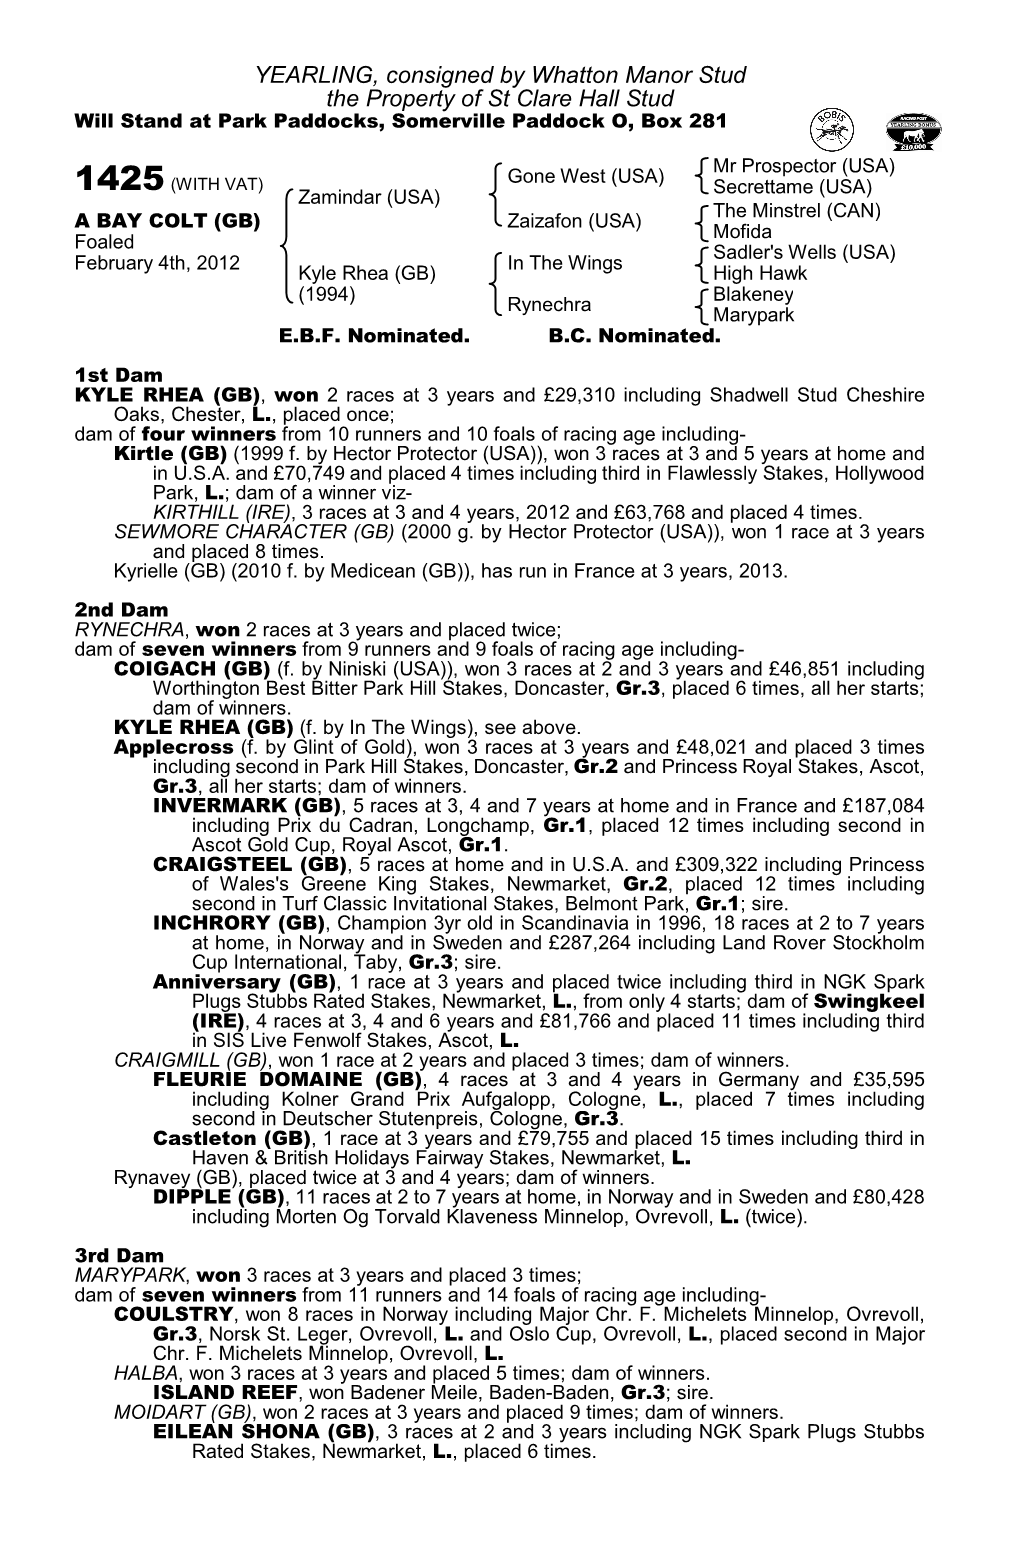 YEARLING, Consigned by Whatton Manor Stud the Property of St Clare Hall Stud Will Stand at Park Paddocks, Somerville Paddock O, Box 281